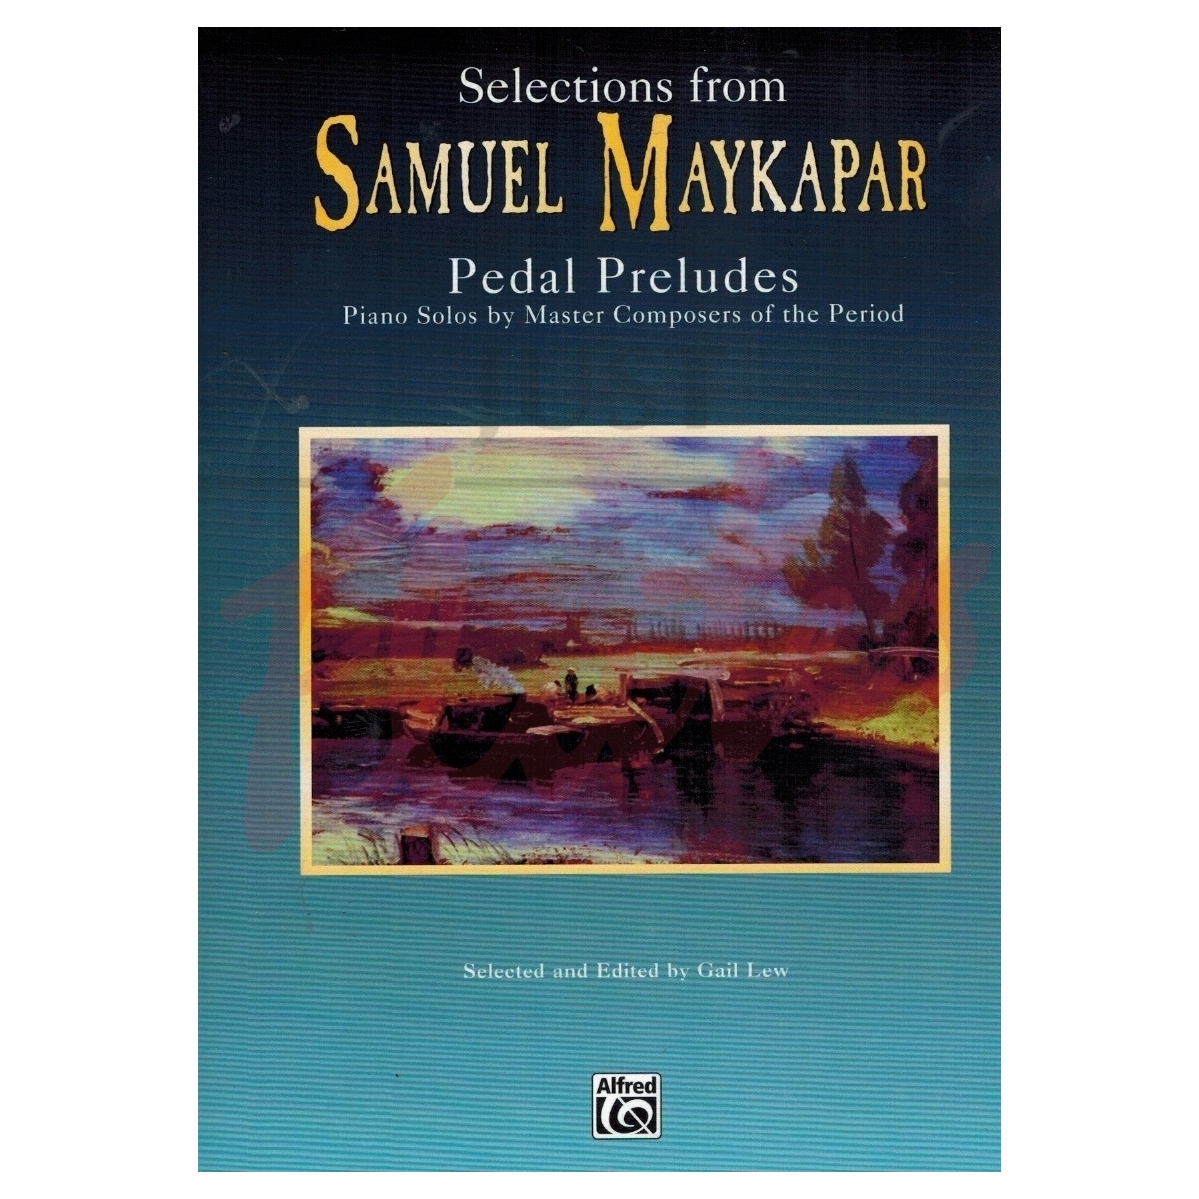 Selections from Samuel Maykapar: Pedal Preludes for Piano